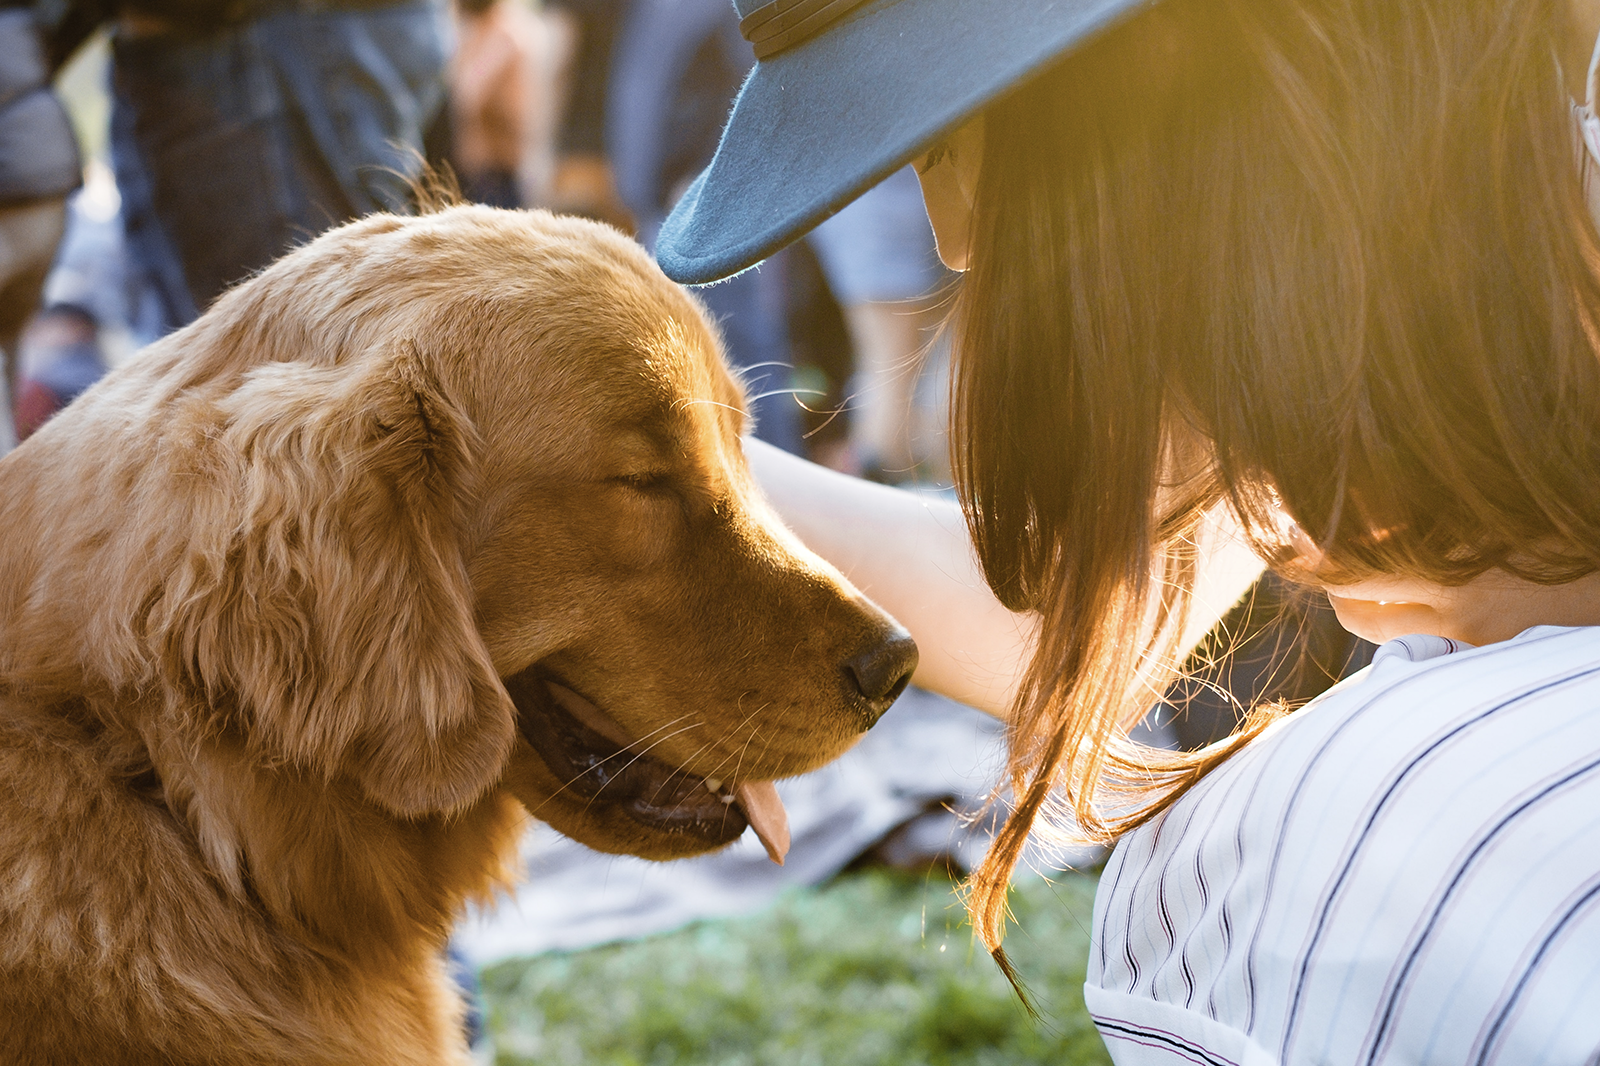 Is CBD Oil Different for Dogs and Humans?